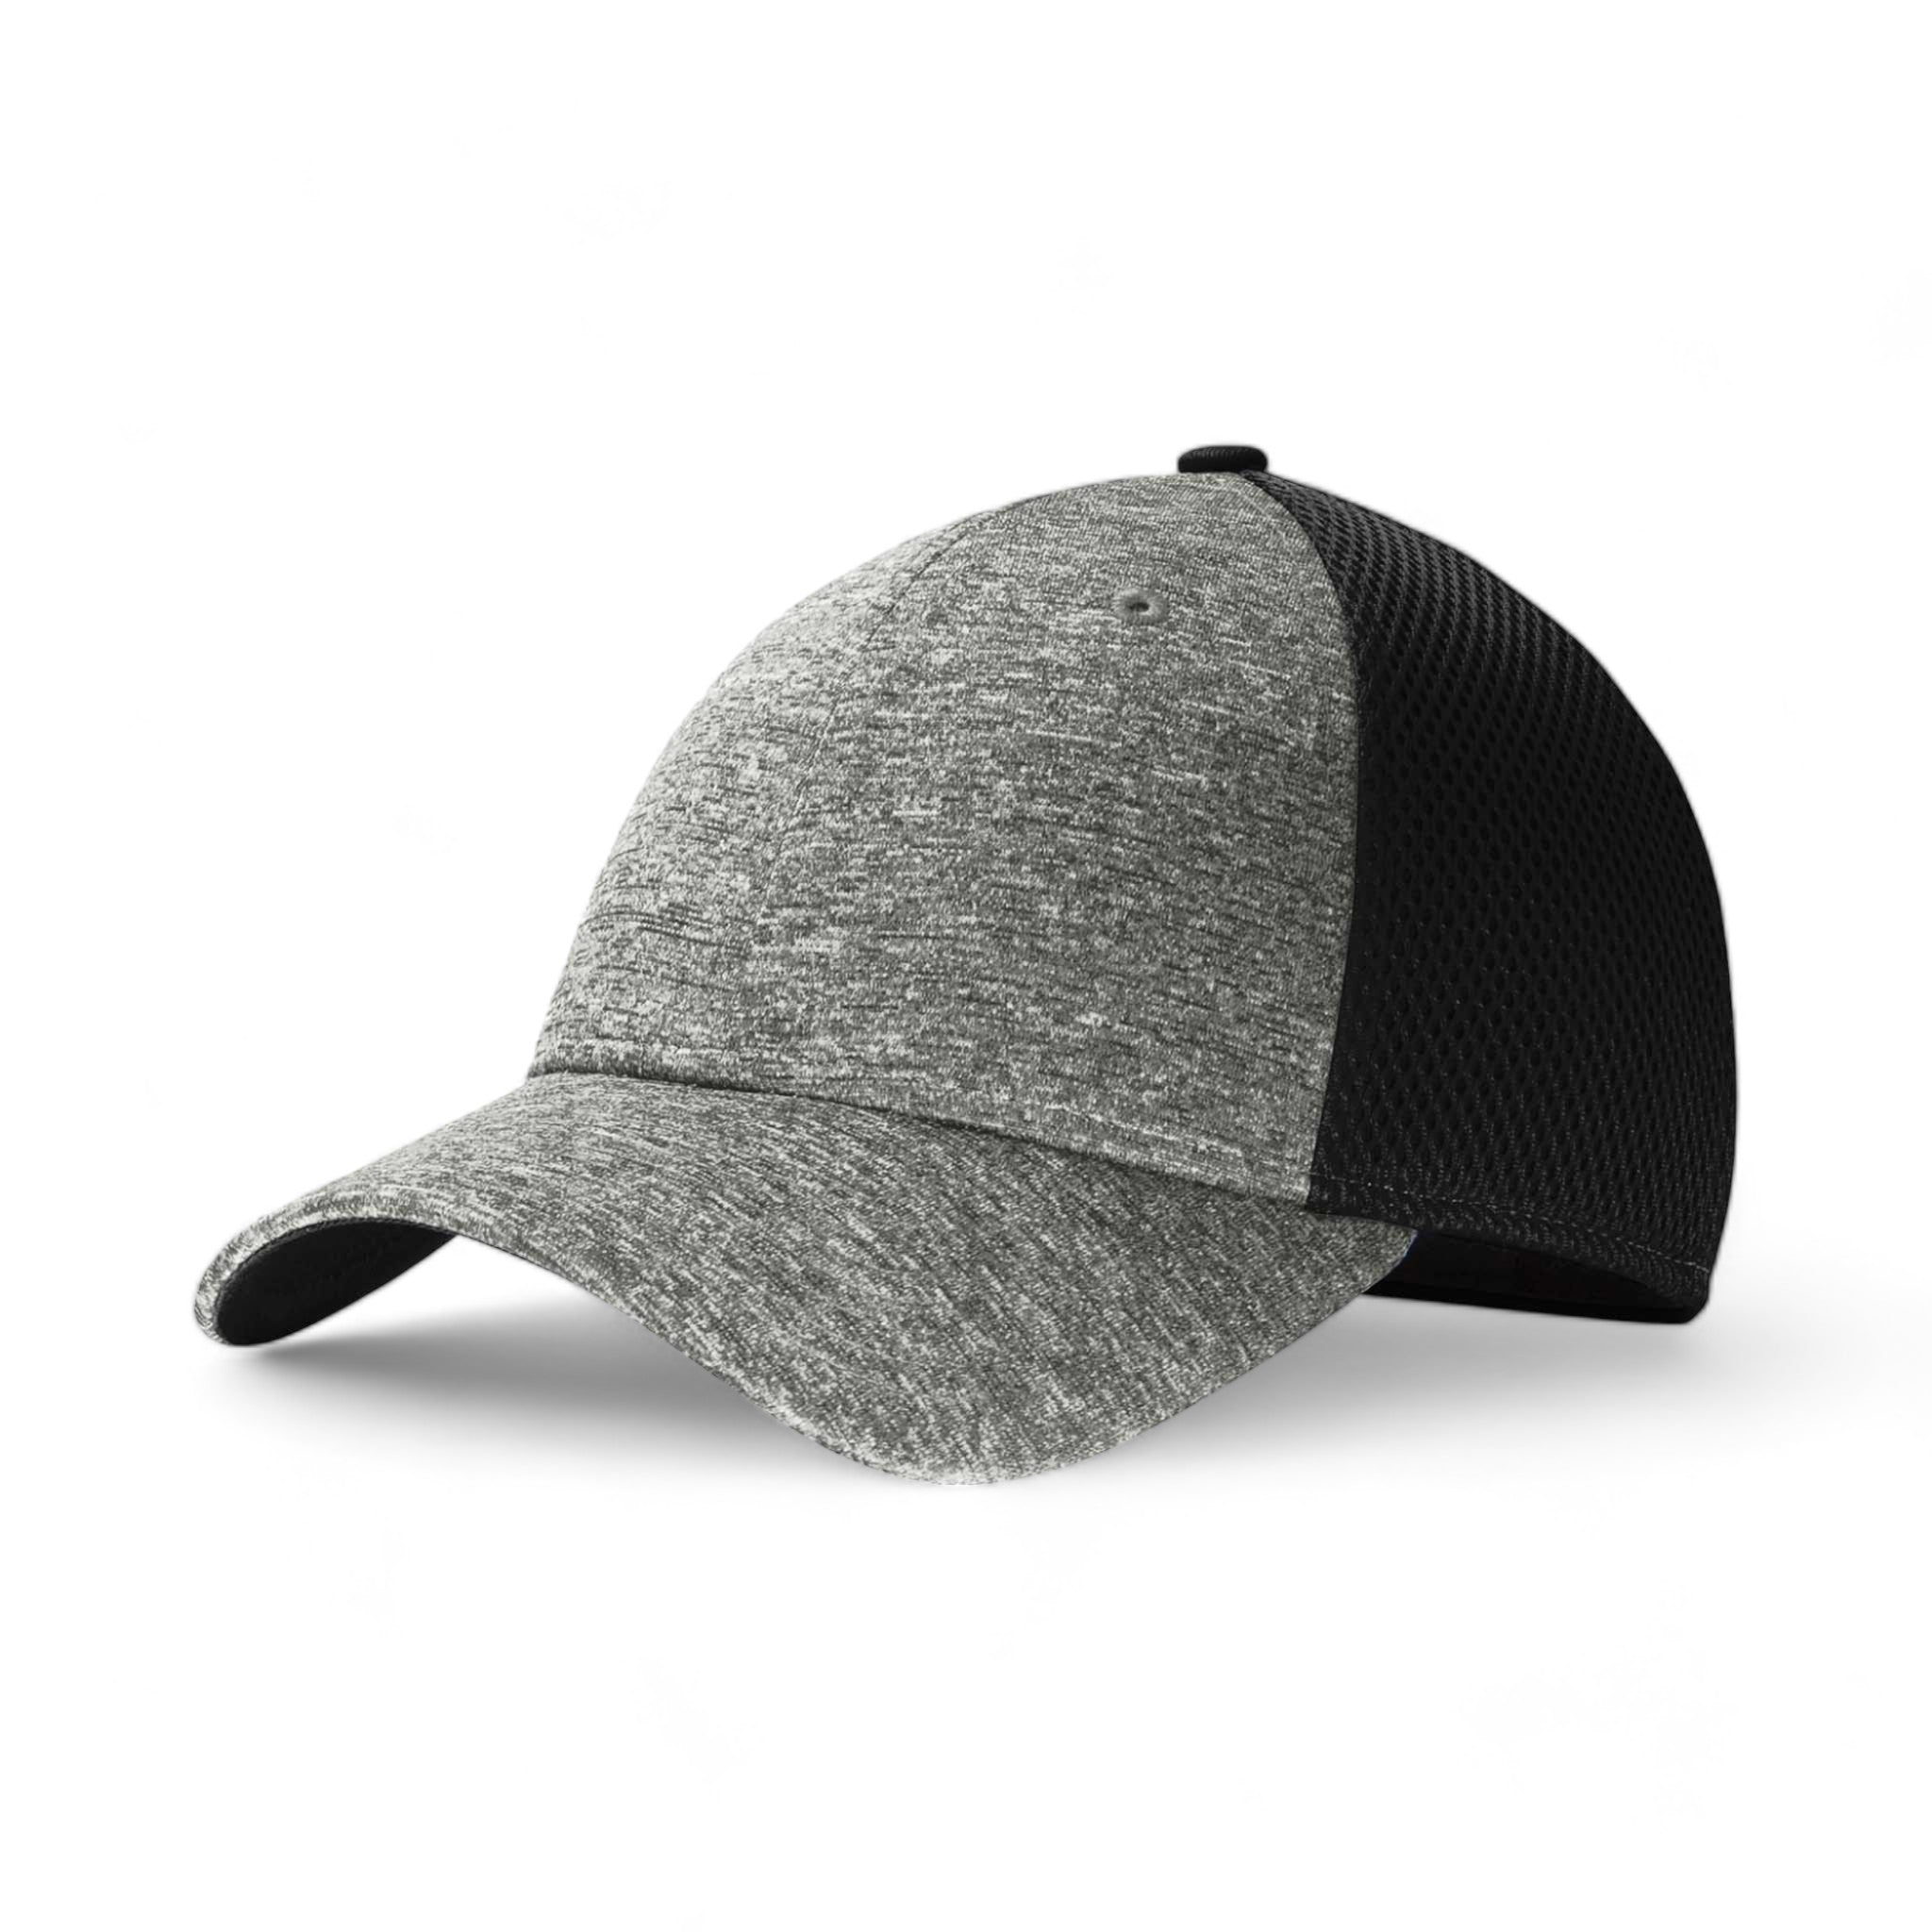 Side view of New Era NE702 custom hat in black and shadow heather